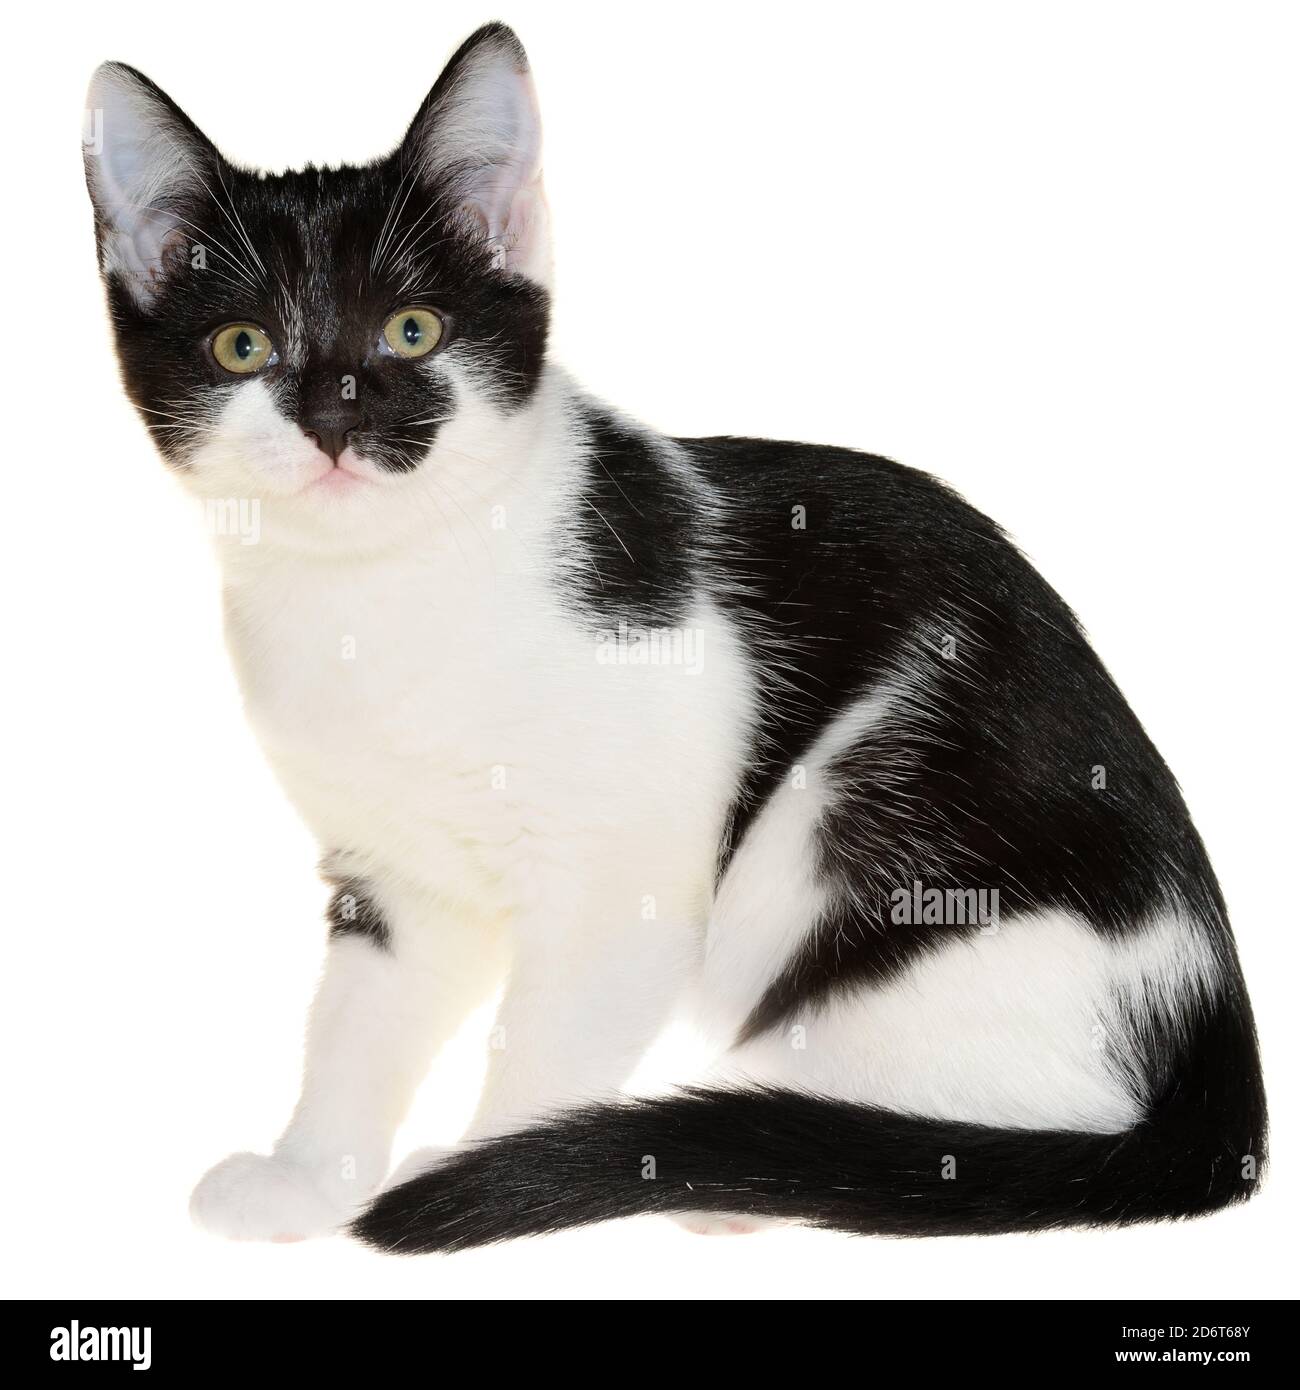 Bicolor black-white small shorthair kitten sitting isolated on a white background. Stock Photo